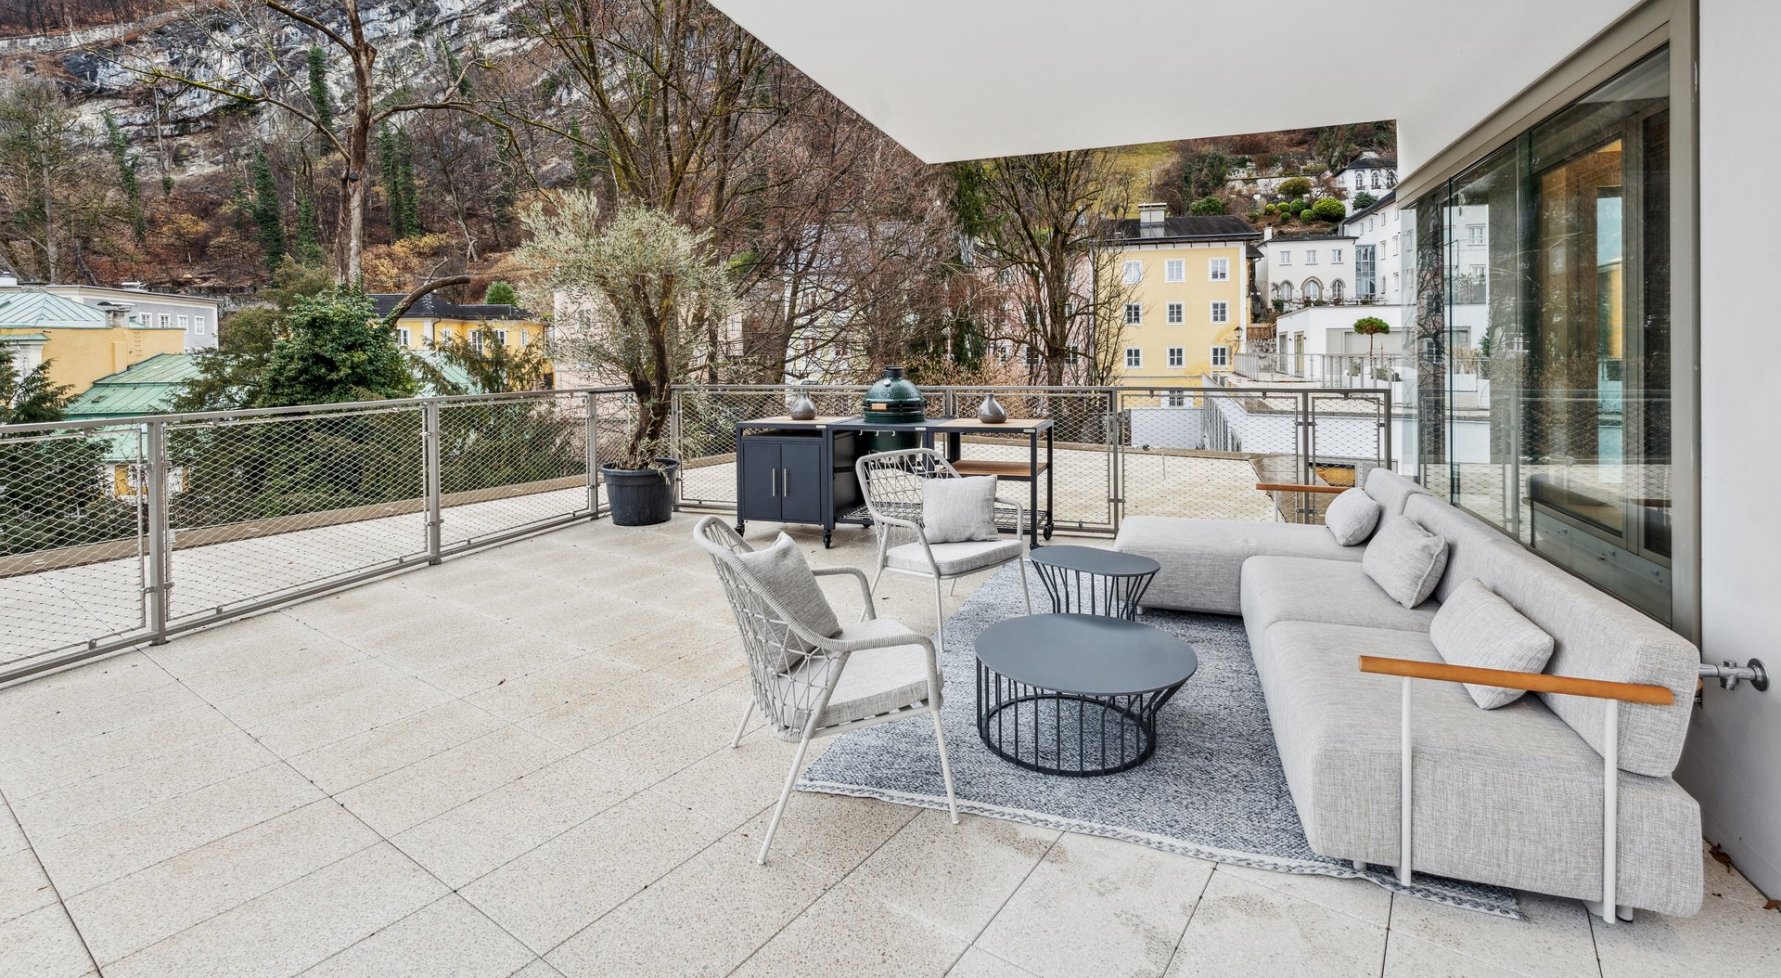 Property in 5020 Salzburg - Innenstadt: Modern city apartment with XL sun terrace and fortress view! - picture 1